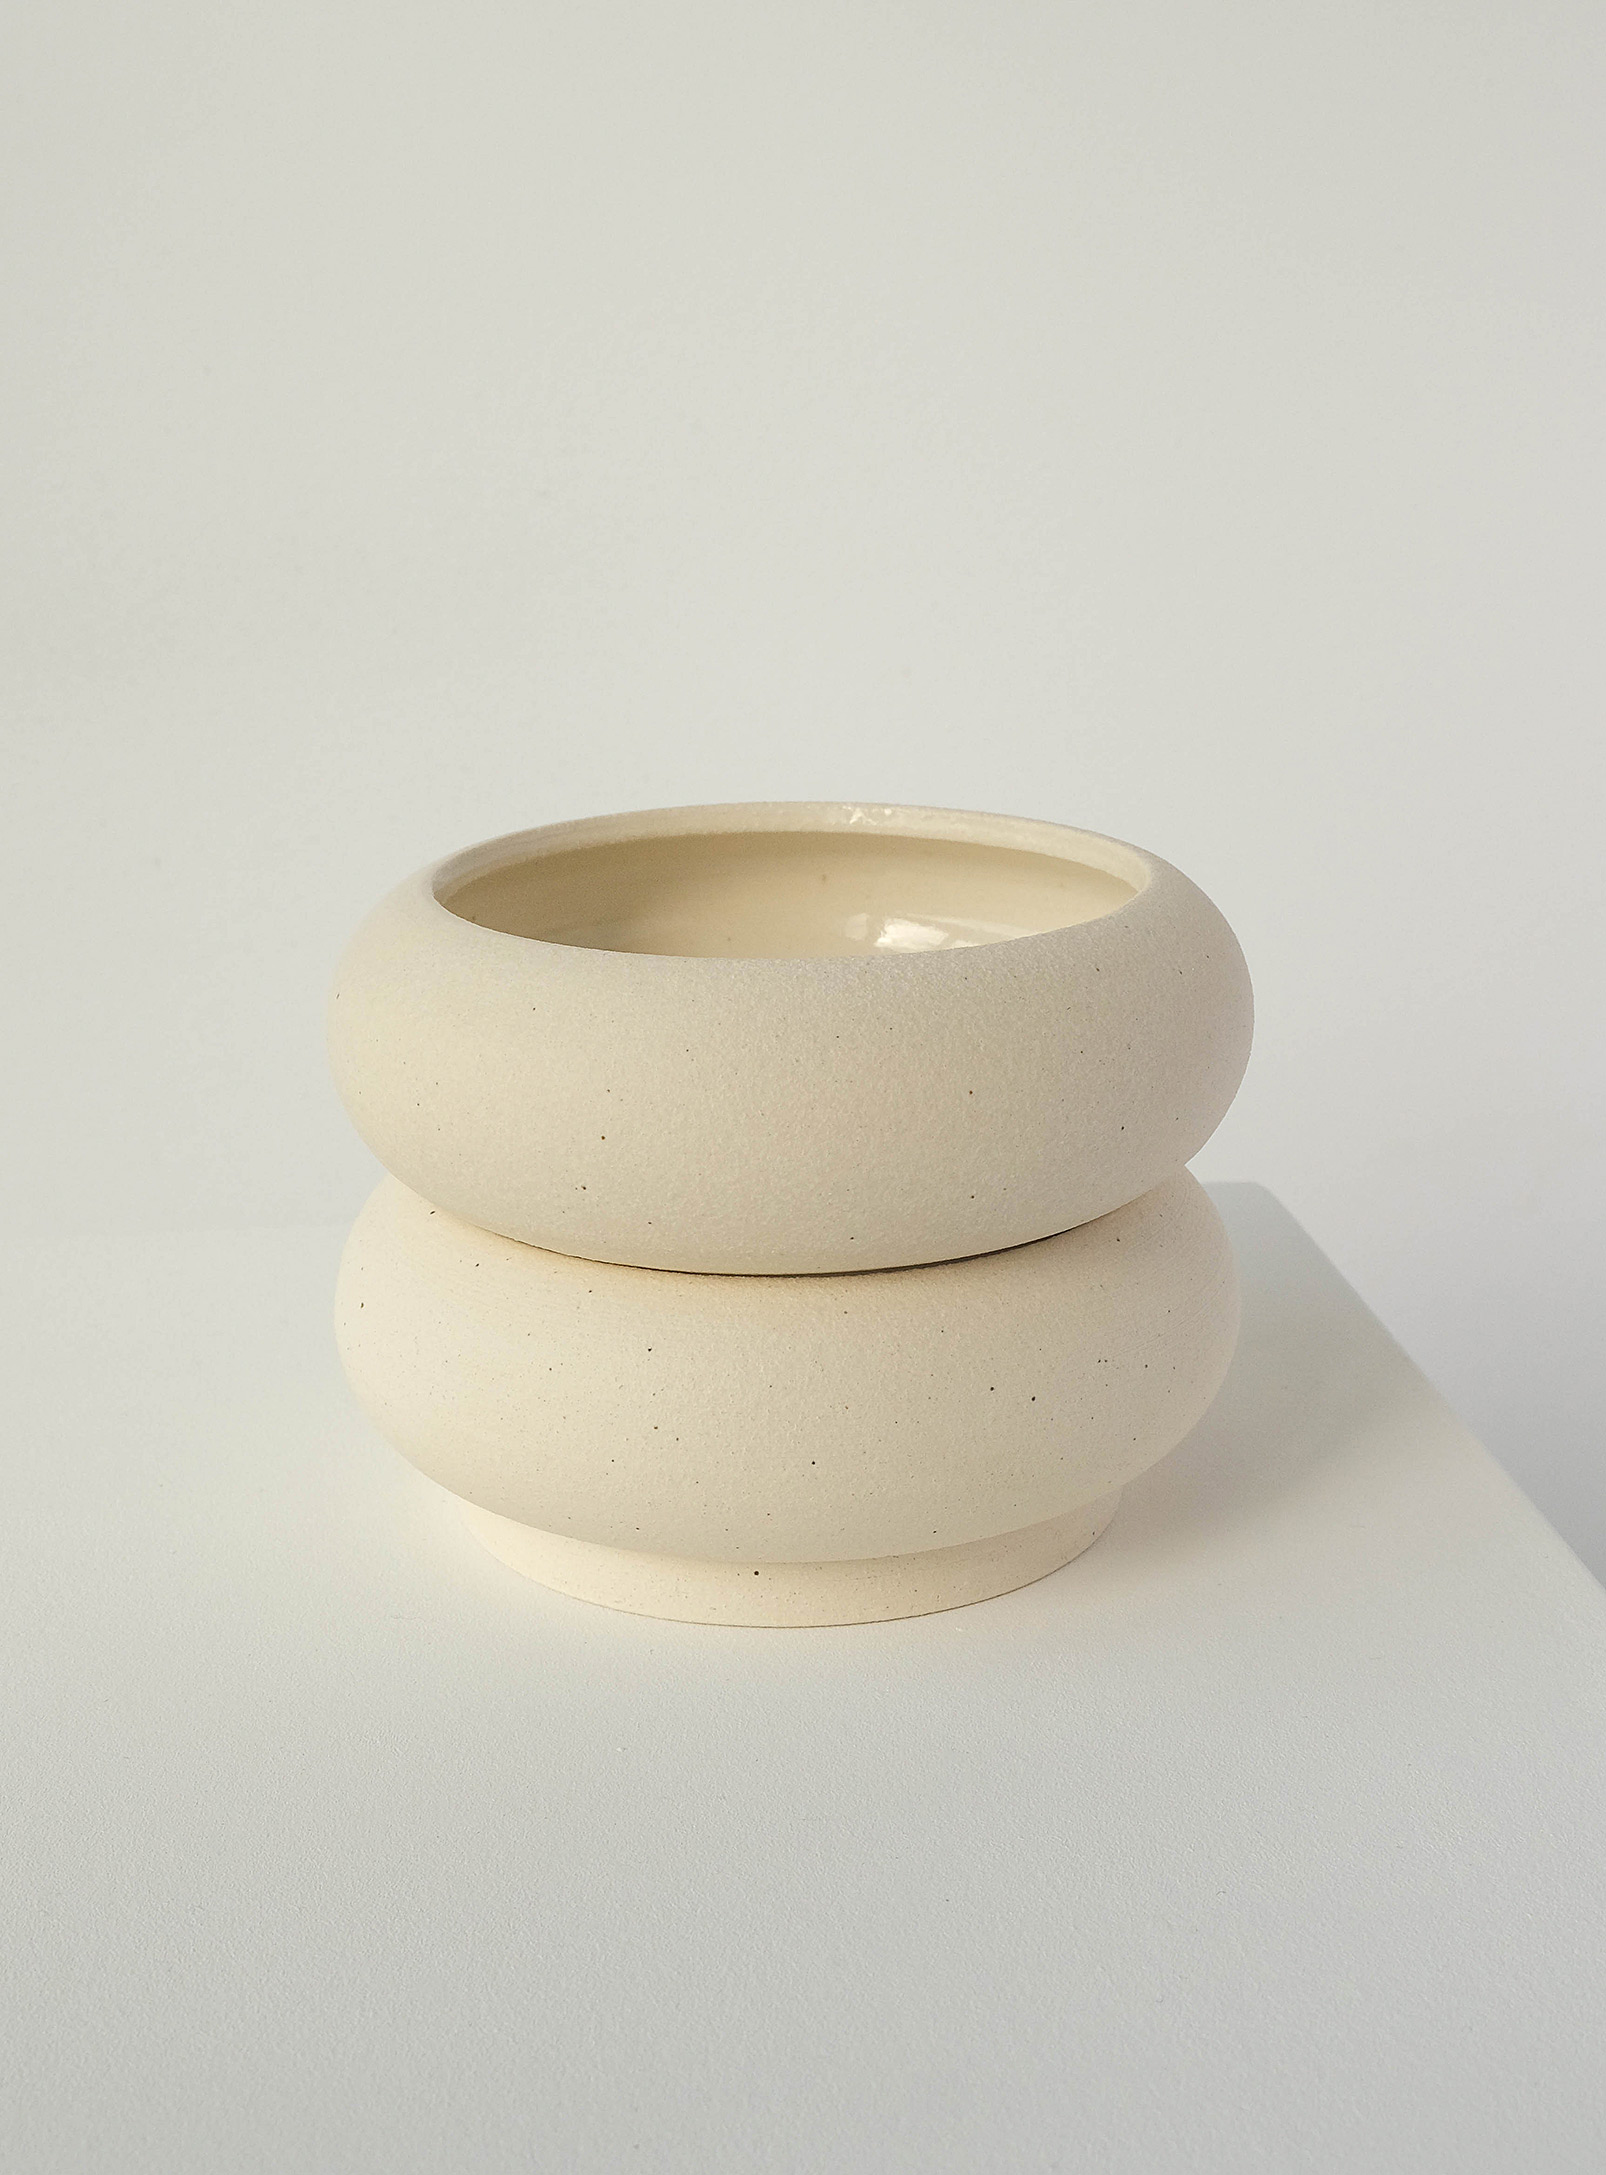 Pms Stacking Bowl In Ivory White